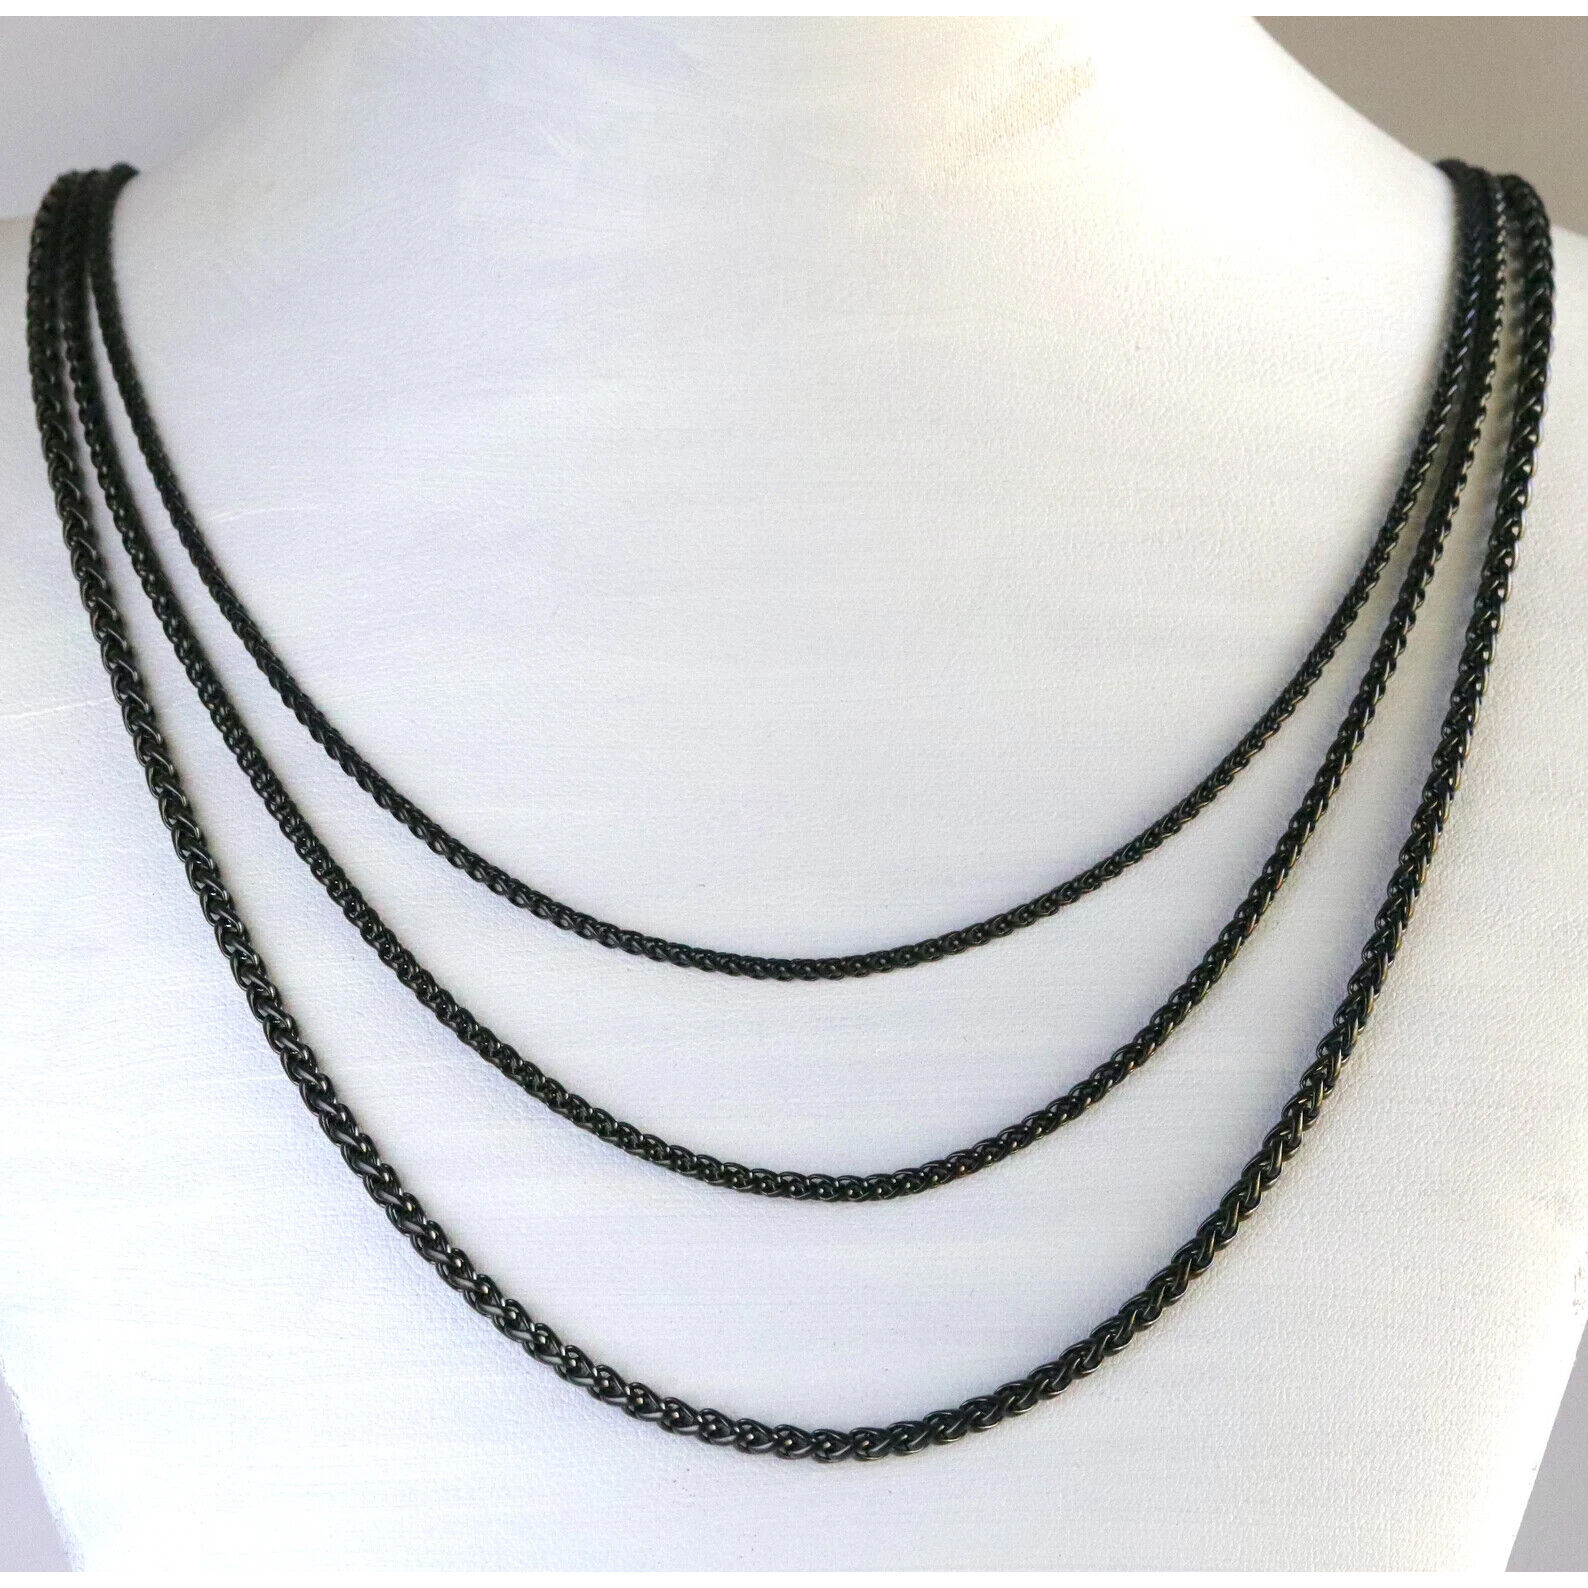 10pcs Black Wheat Chain Necklace Stainless Steel Chain for Jewelry Making